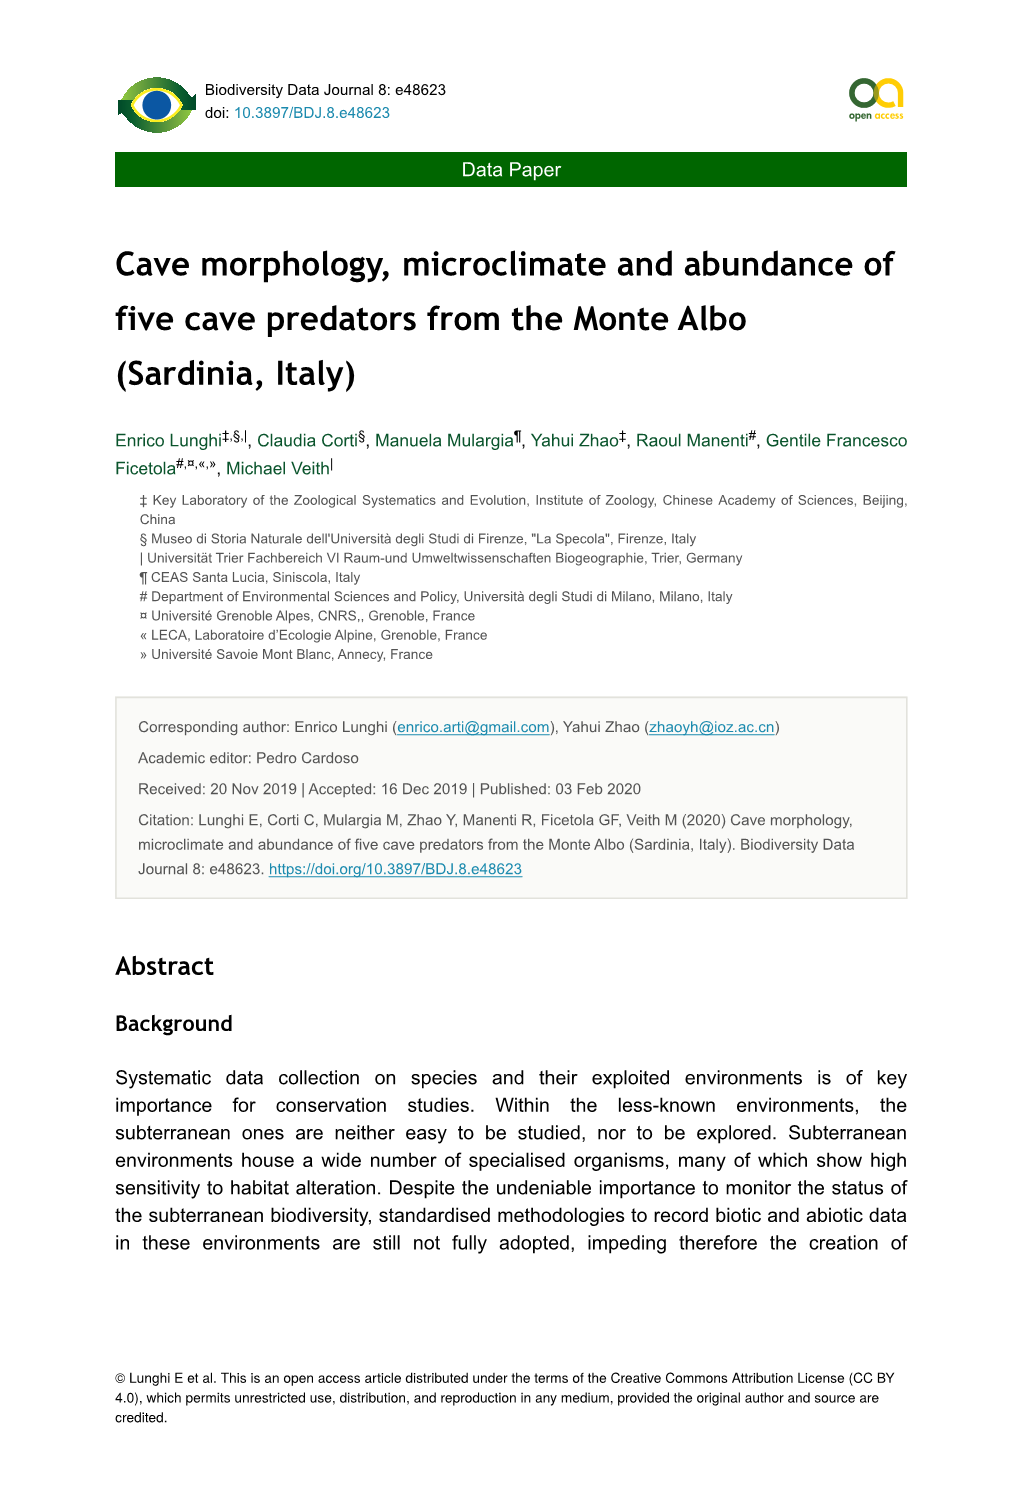 Cave Morphology, Microclimate and Abundance of Five Cave Predators from the Monte Albo (Sardinia, Italy)